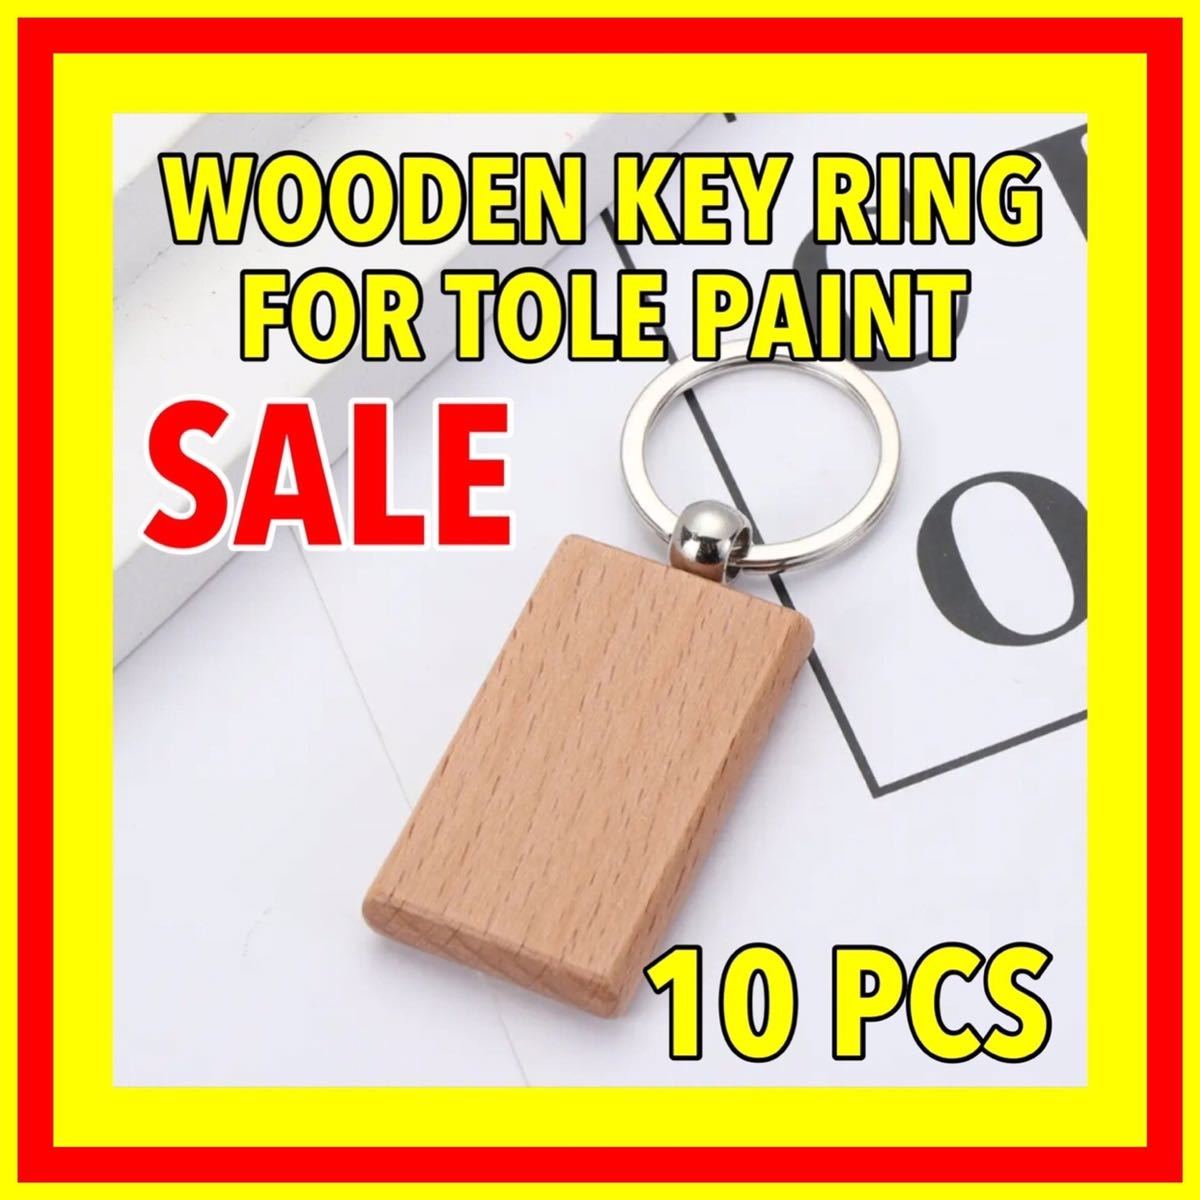 Tole painting key ring handmade key holder interior work material materials sundries plain wood wooden products paint, Handcraft, Handicrafts, Woodworking, paint, Tole painting